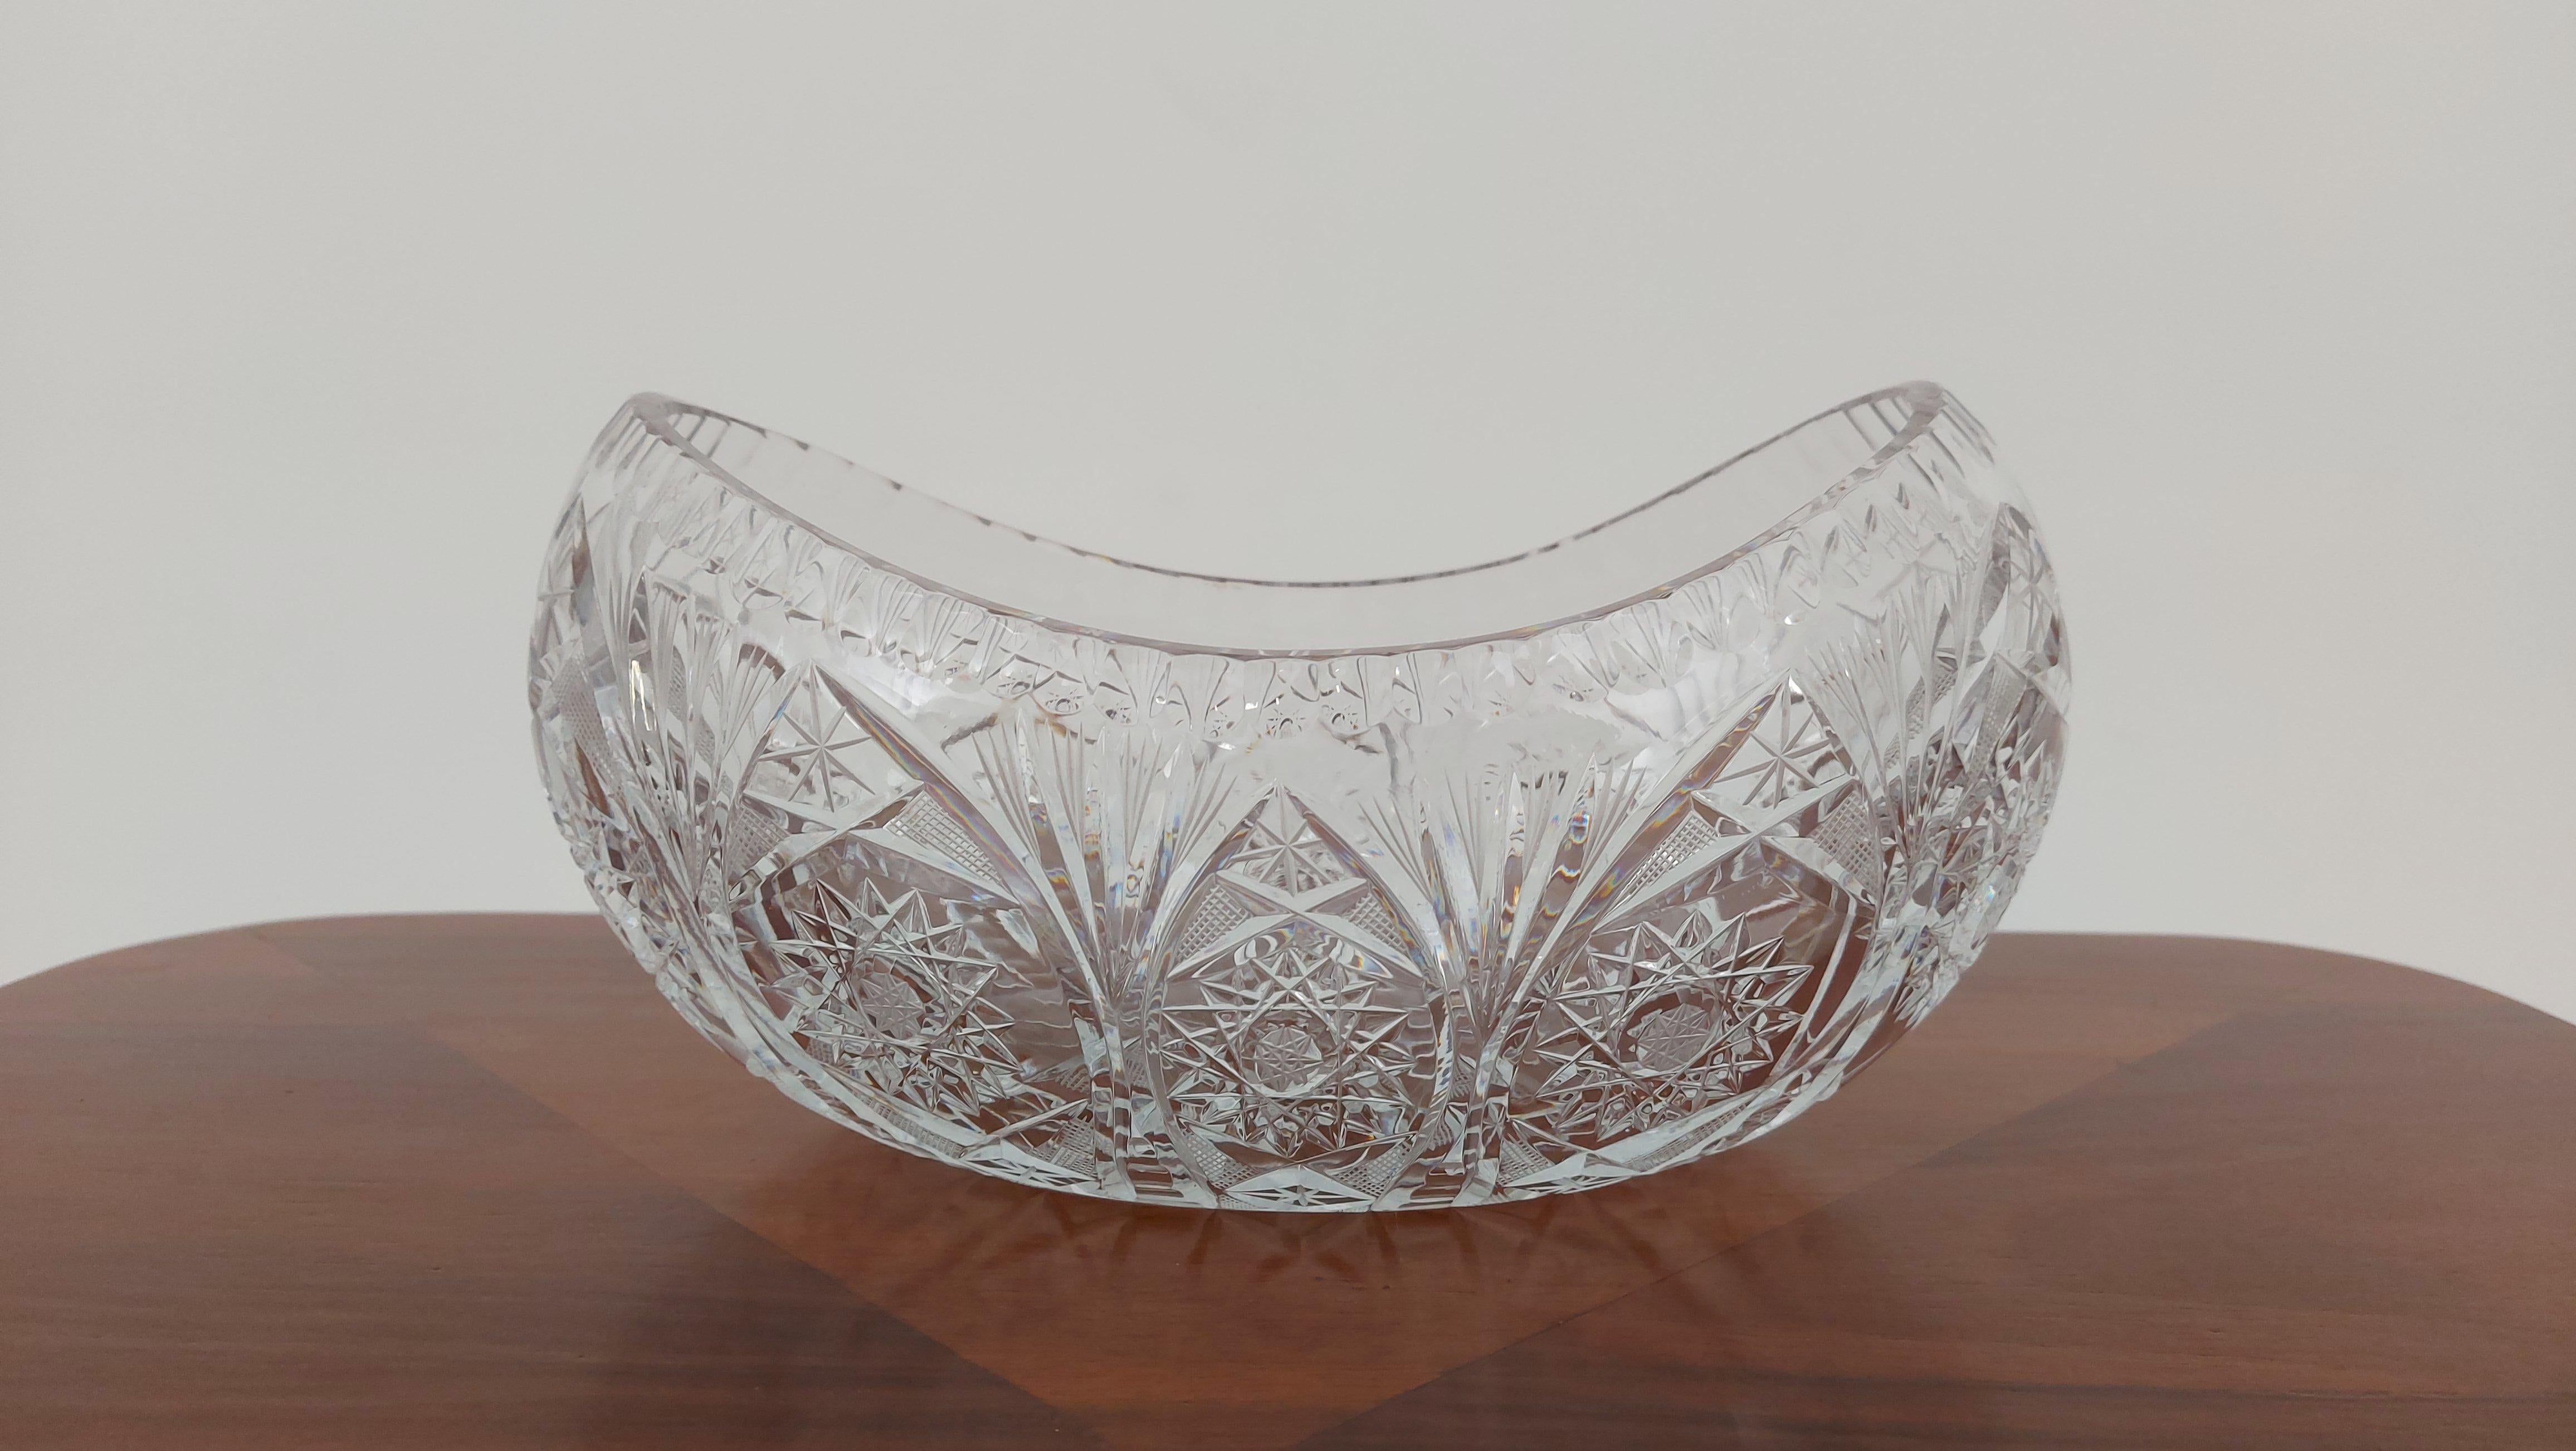 Crystal bowl for fruit or sweets.

Made in Poland in the 1950s / 1960s.

Dimensions: height 12 cm / width 26 cm / depth 15.5 cm.